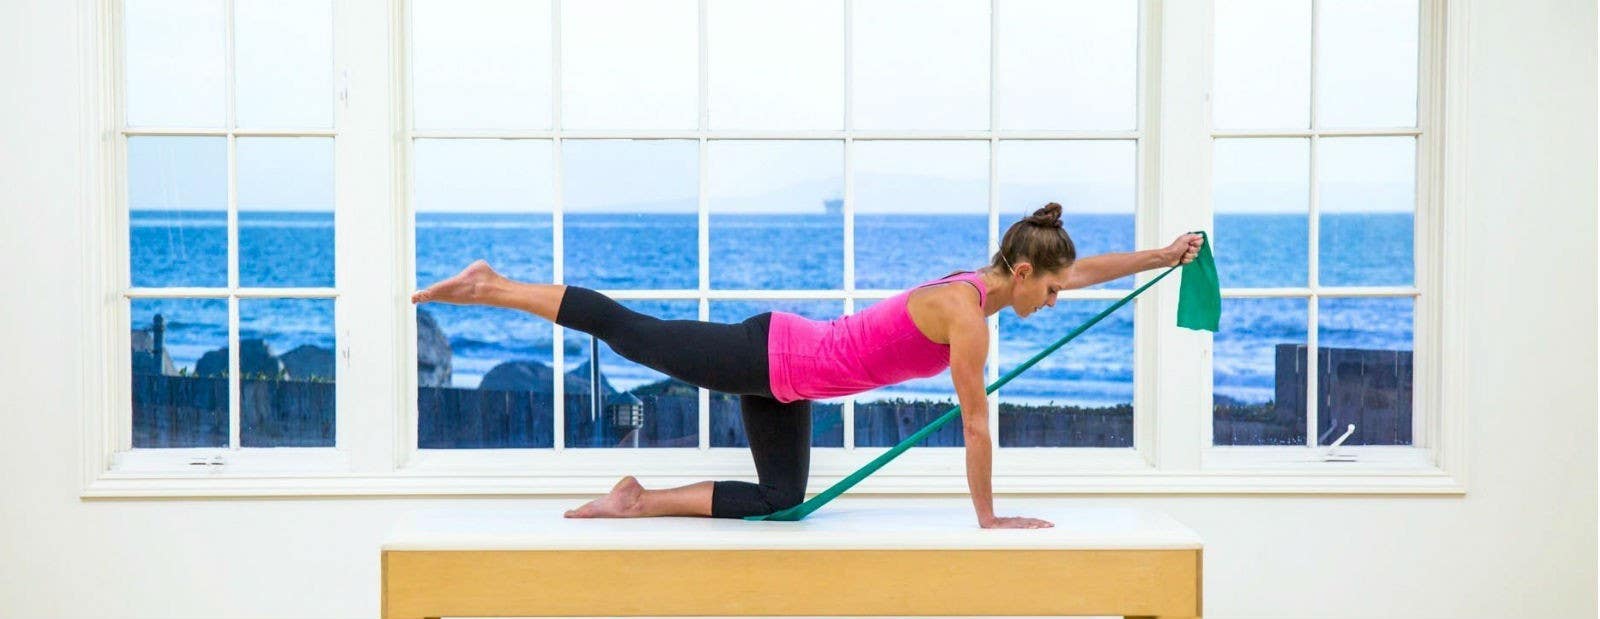 7 Pilates Reformer on the mat exercises to try at home